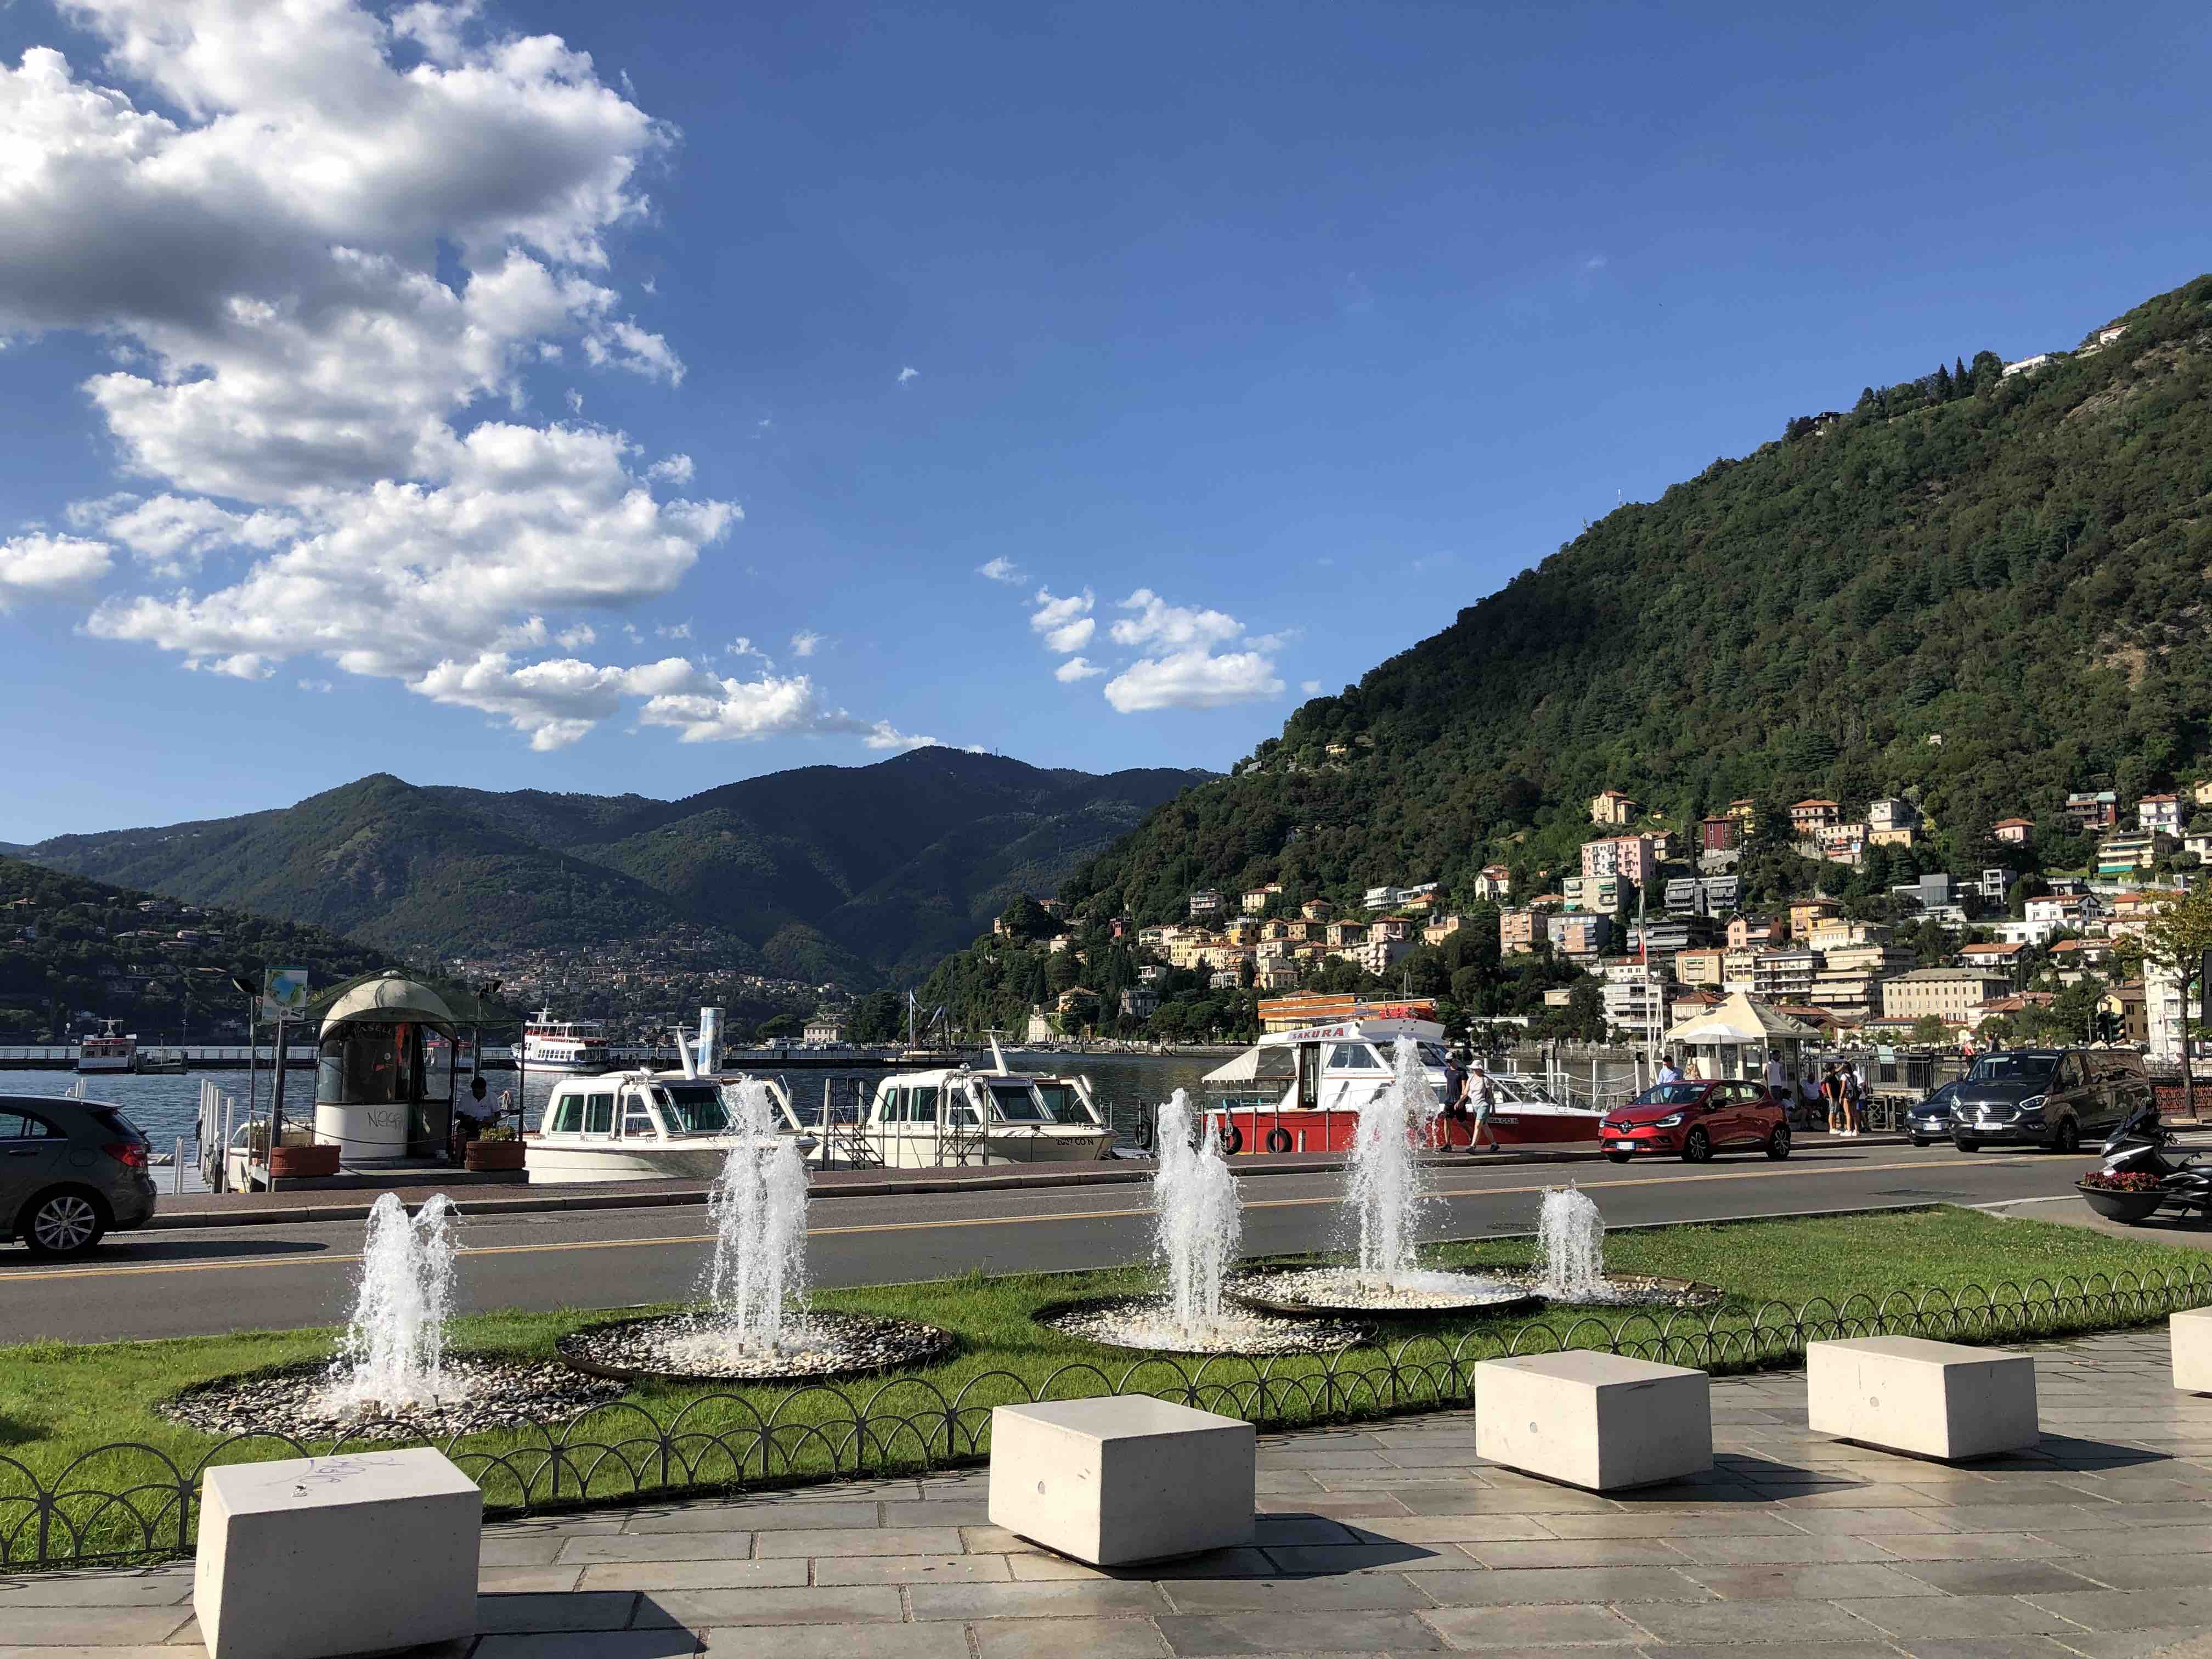 Le Fontanelle di Piazza Cavour Como overlooking the lake with docked boats